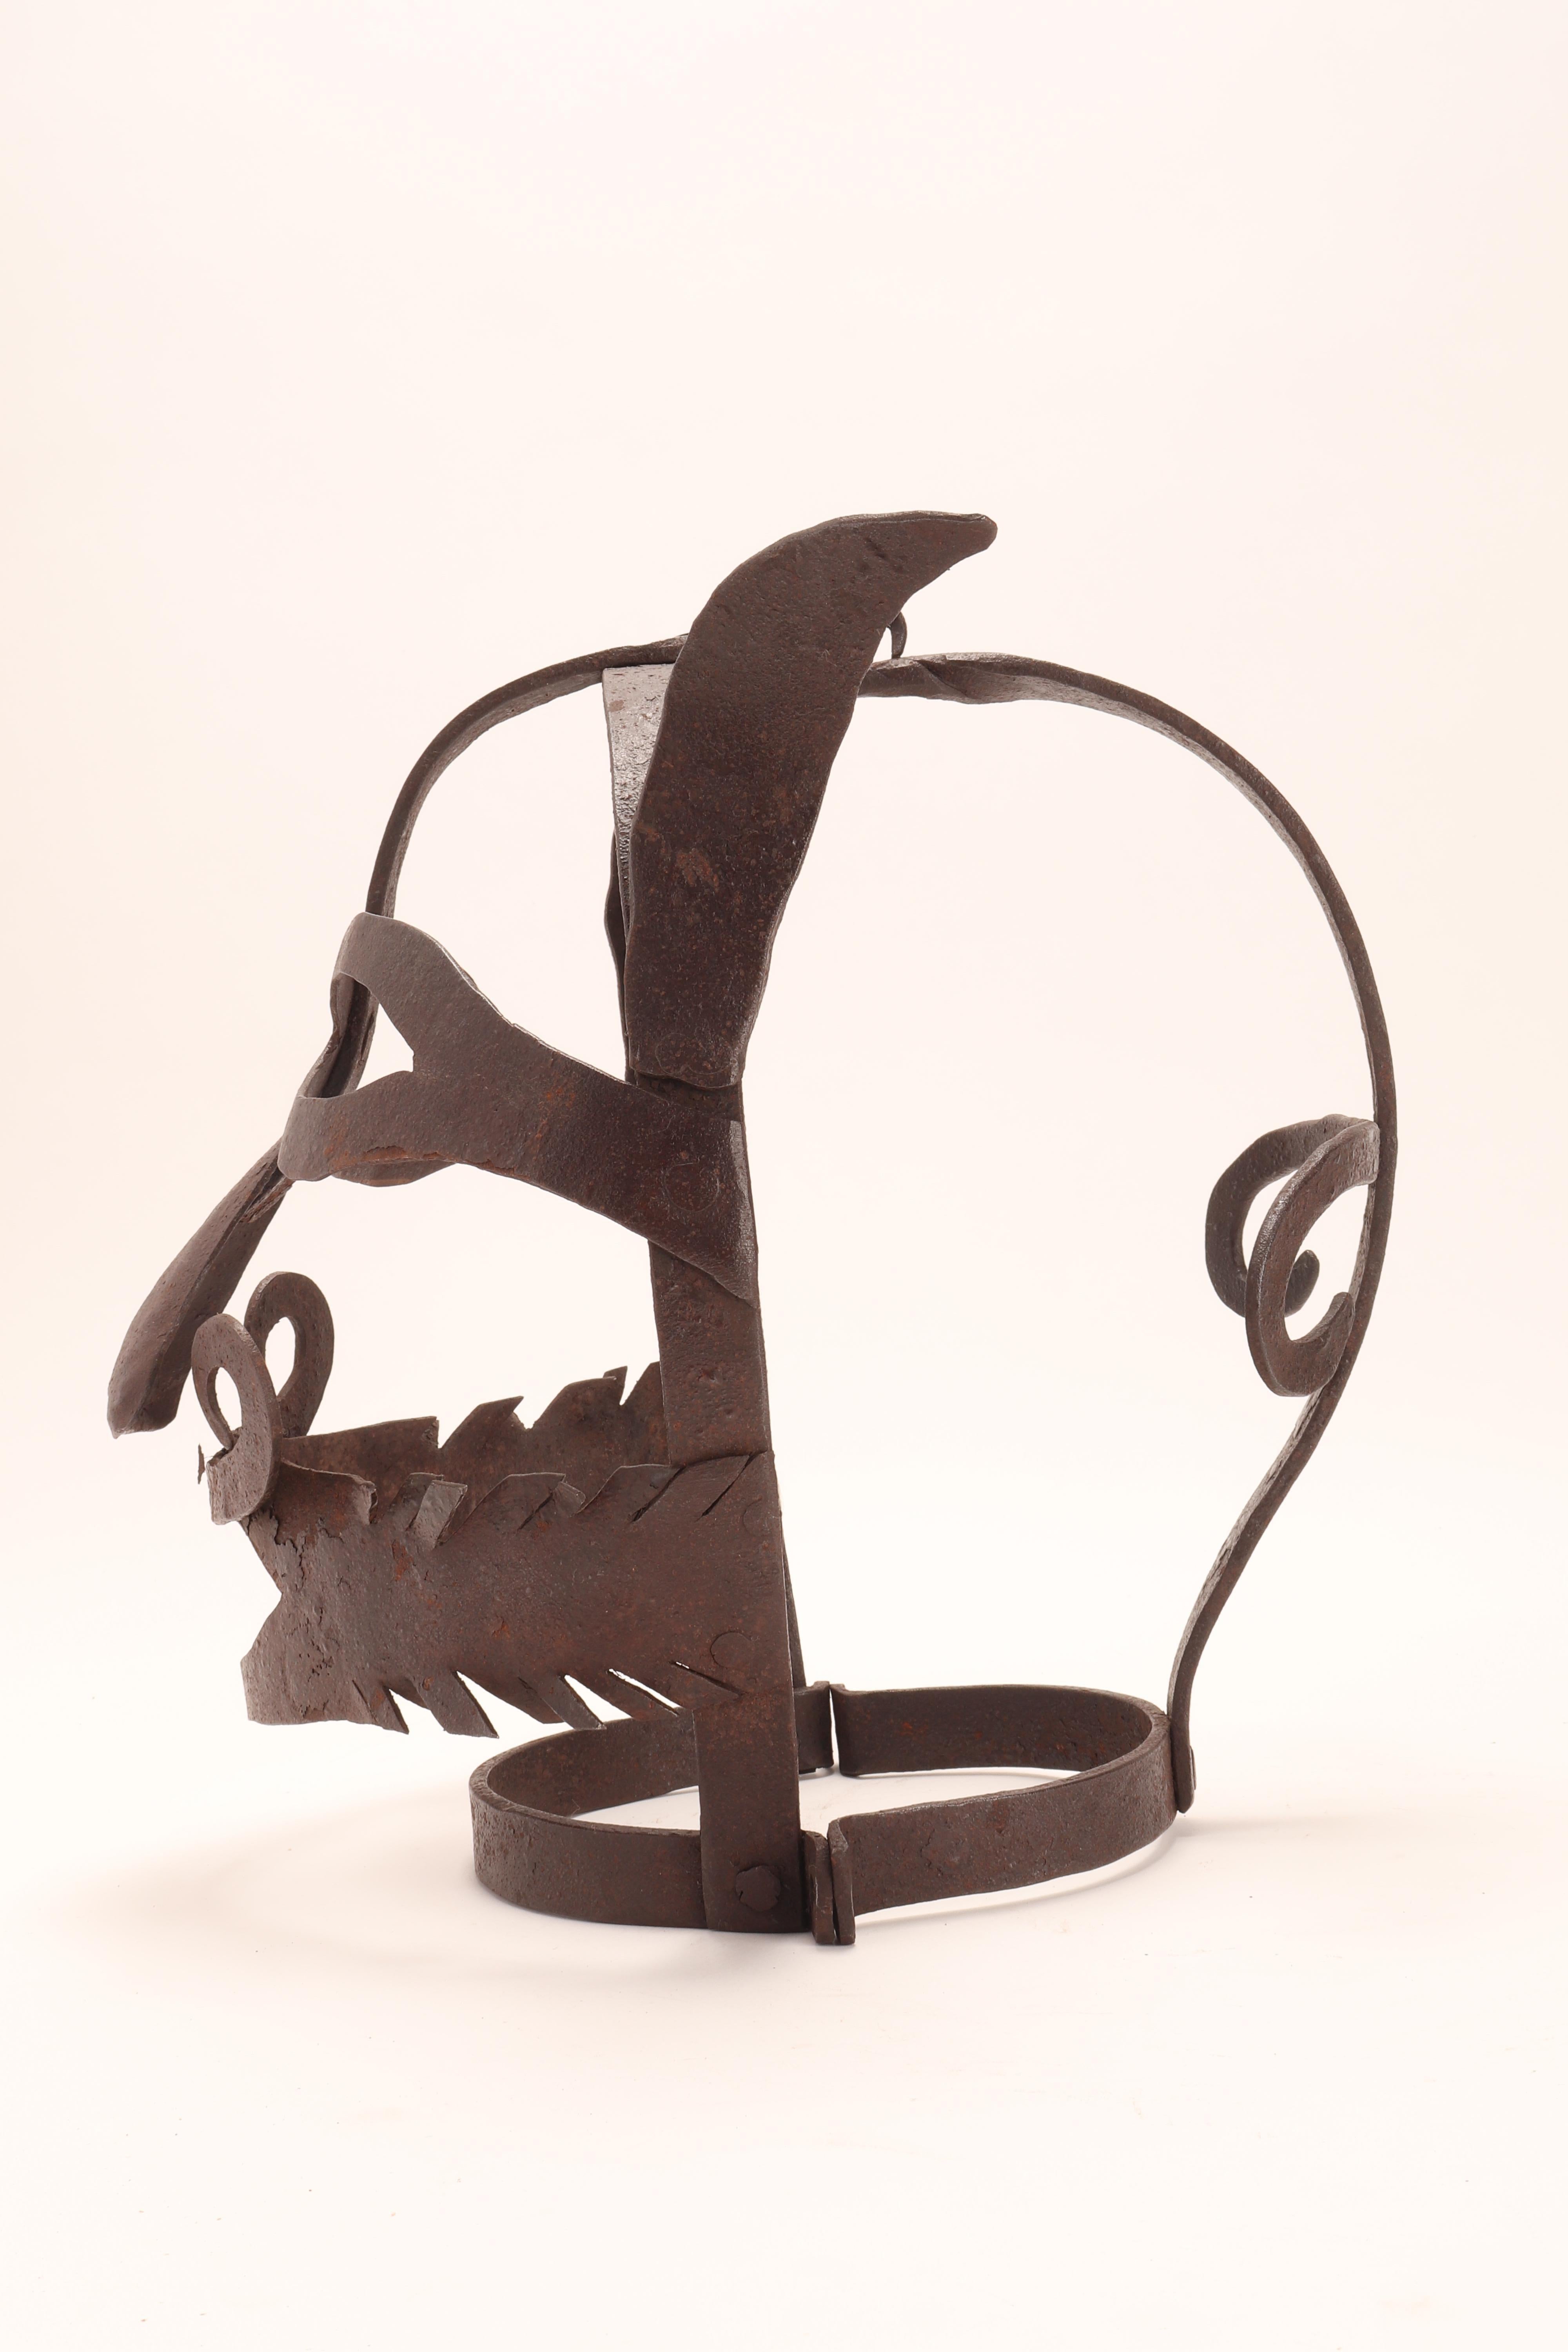 modern scold's bridle